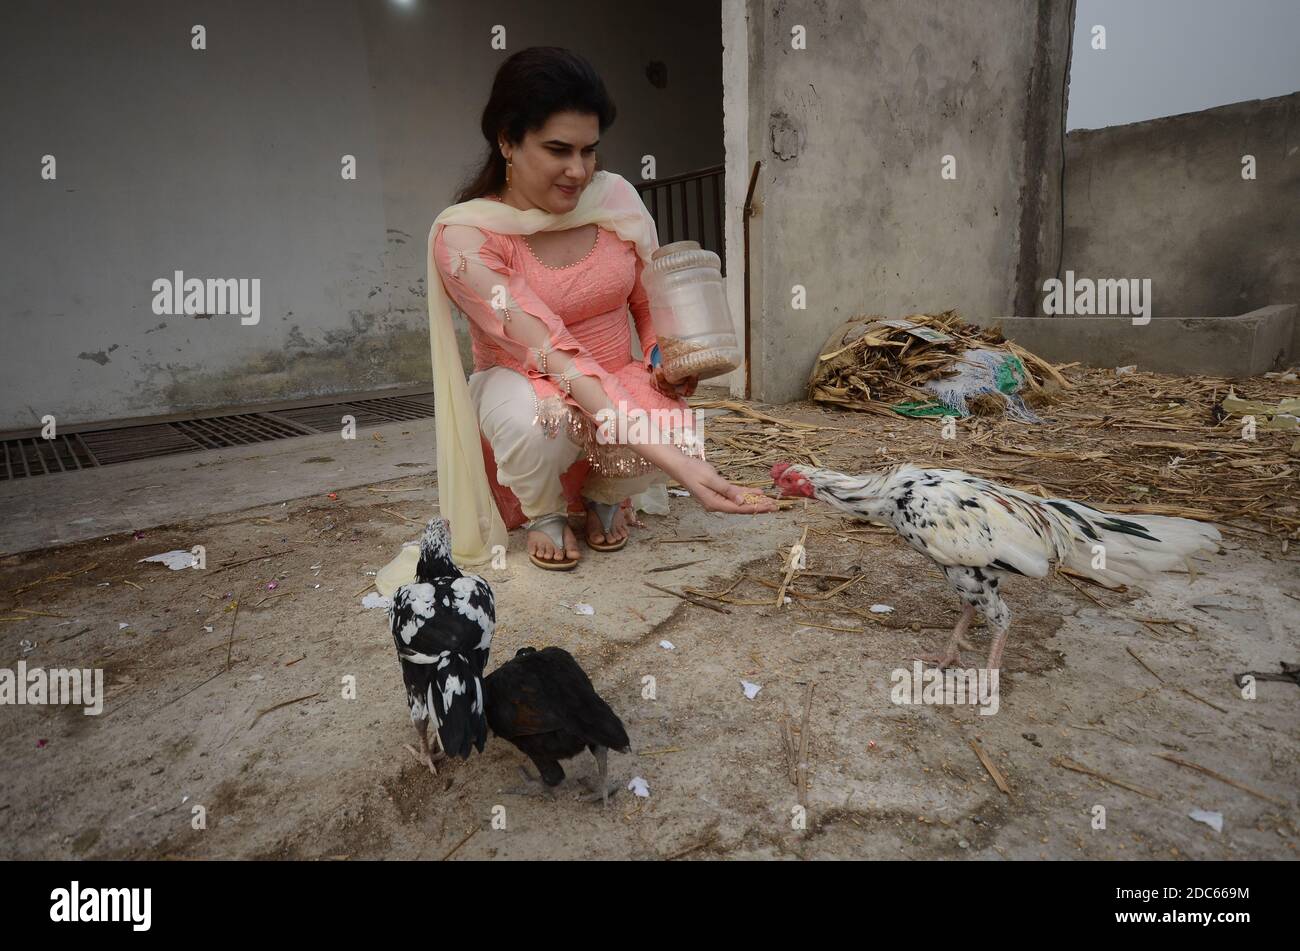 Peshawar, Pakistan. 19th Nov, 2020. Transwoman Zeeshan Khan feeding chickens. In September 2020, the 26-year-old had lost a friend who was killed. (to dpa: 'Transgender in Pakistan lament hate and violent crime') Credit: Hasnain Ali/dpa/Alamy Live News Stock Photo